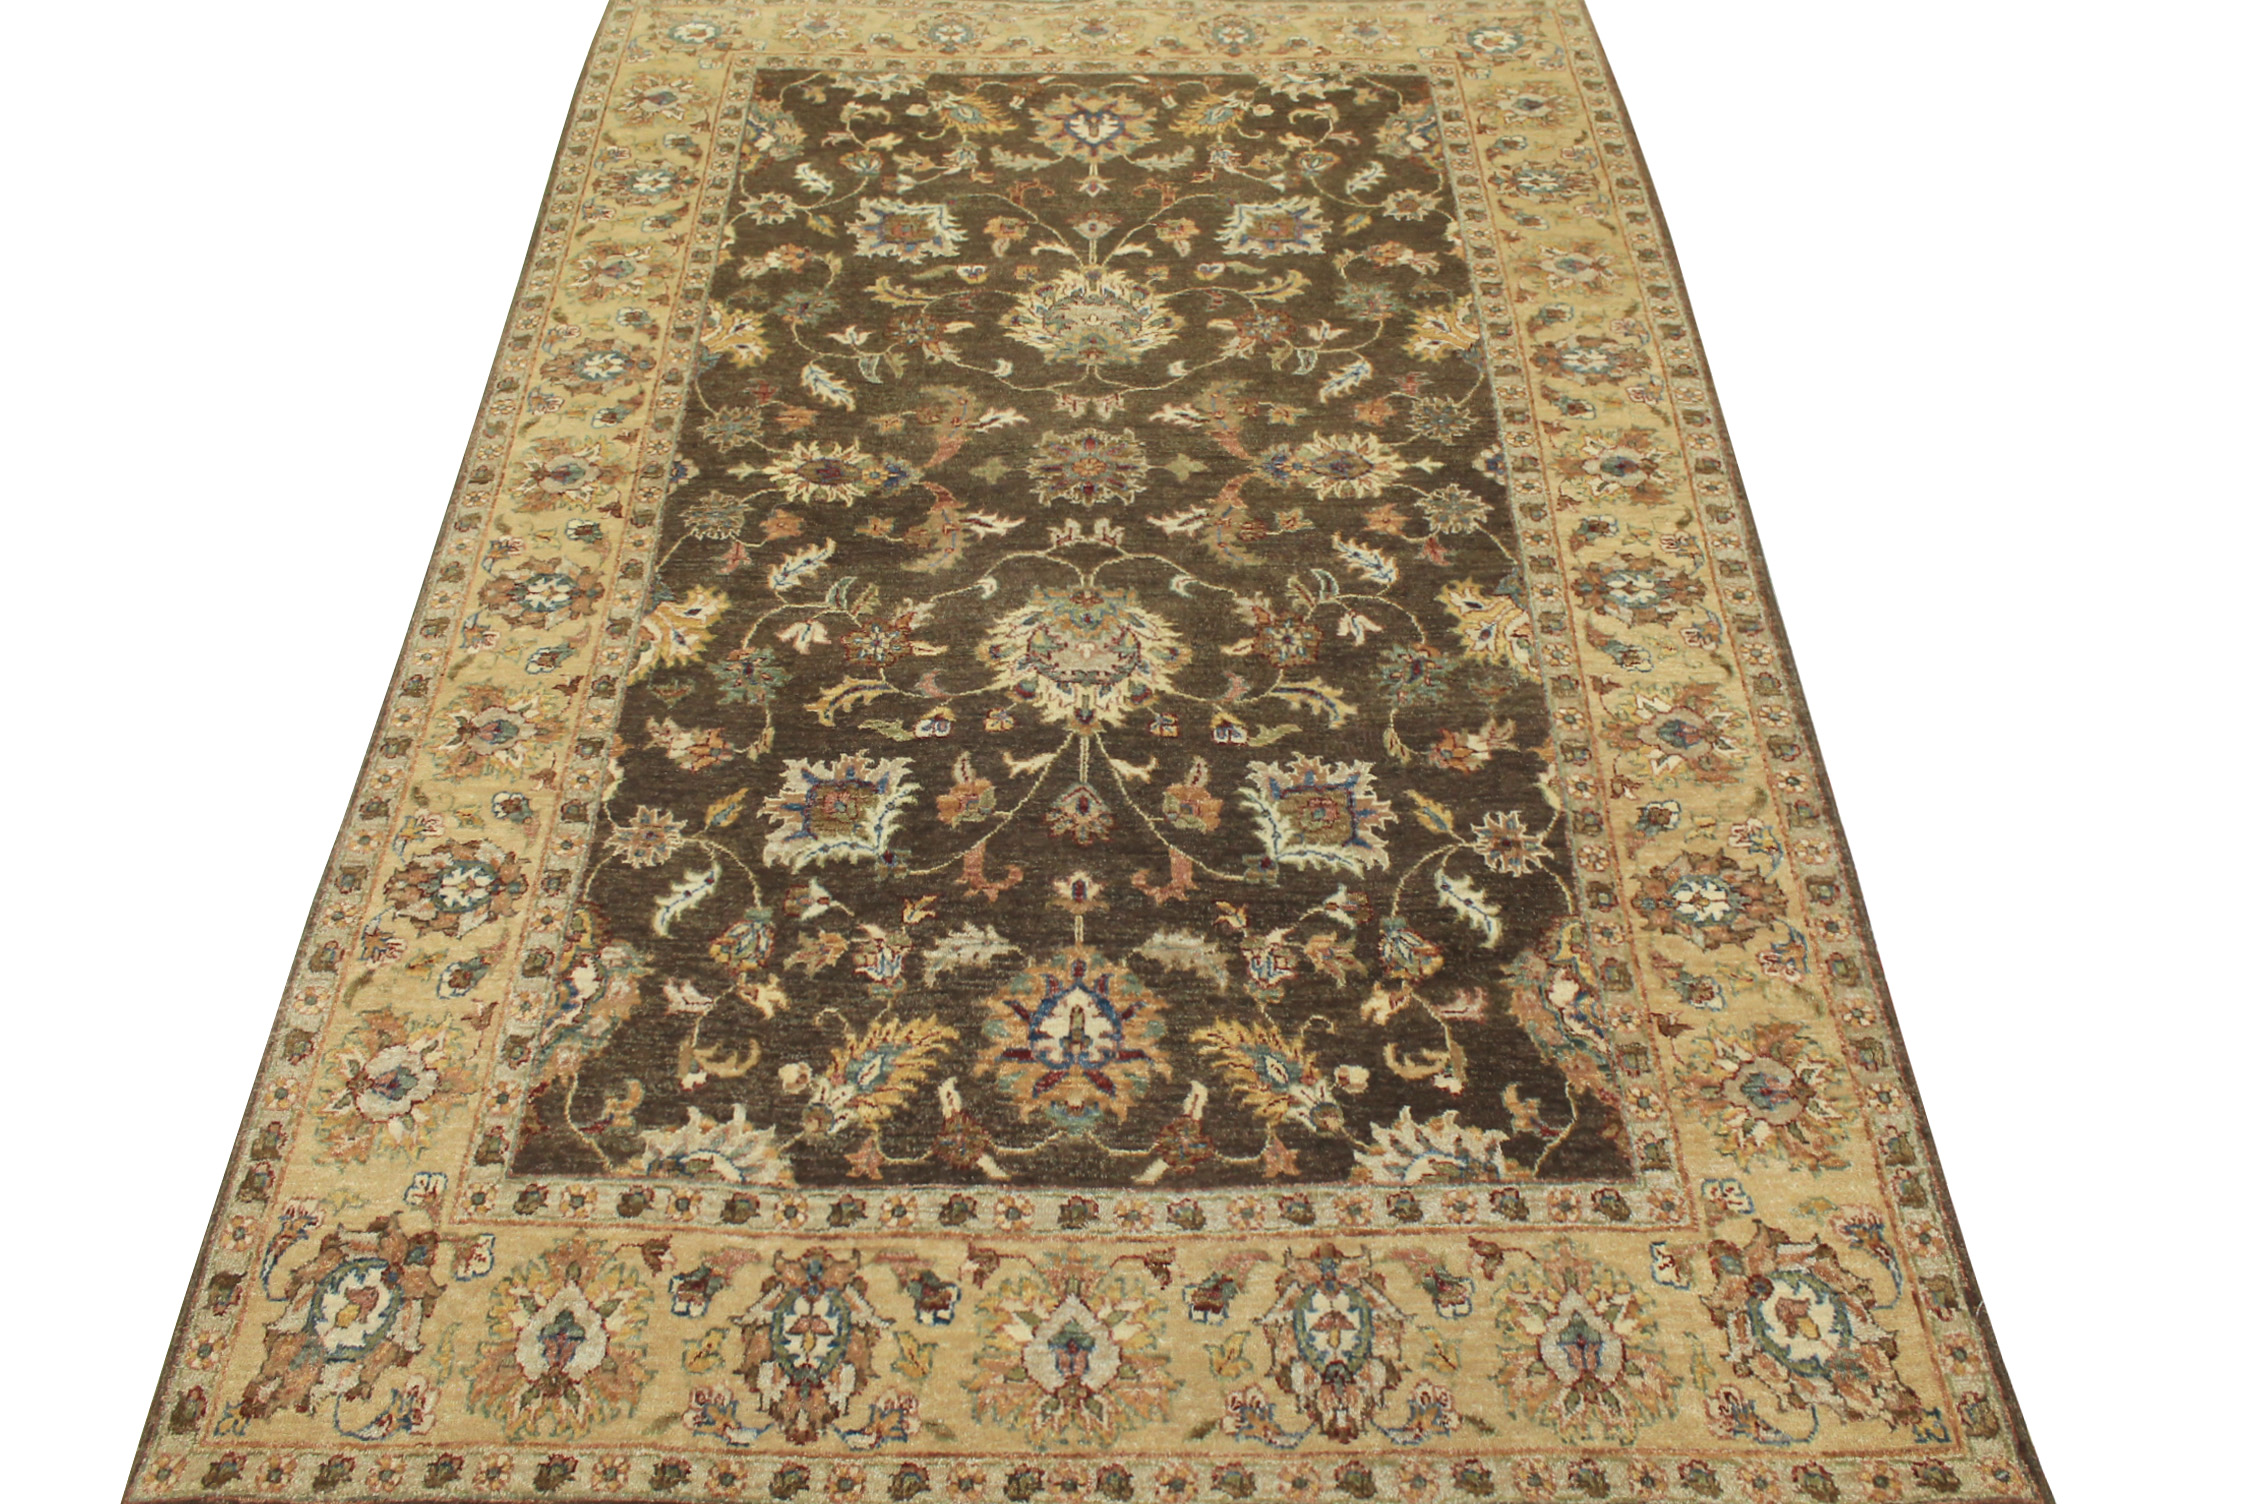 5x7/8 Traditional Hand Knotted Wool Area Rug - MR11688